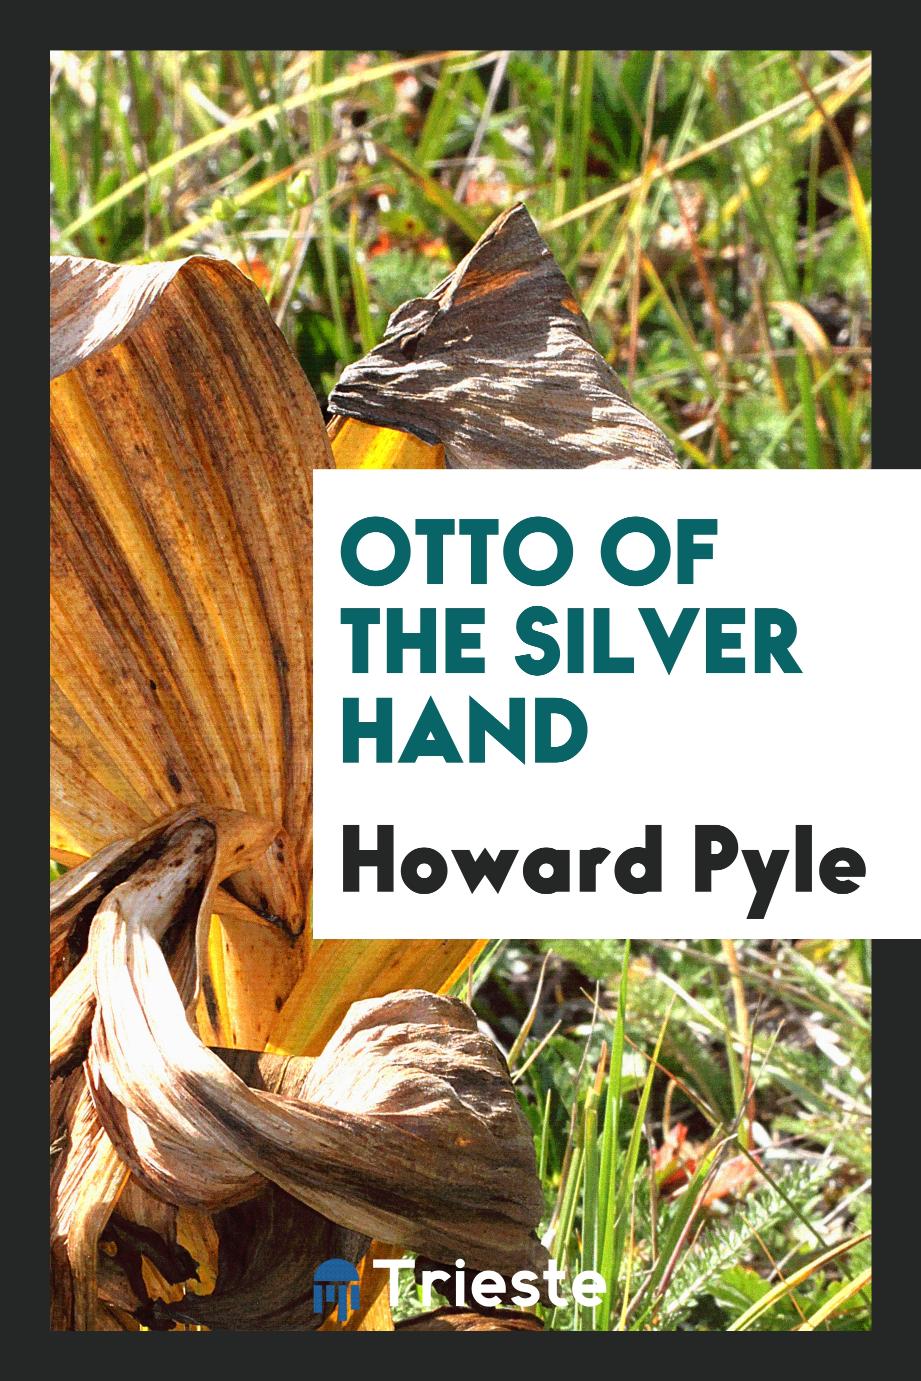 Otto of the silver hand